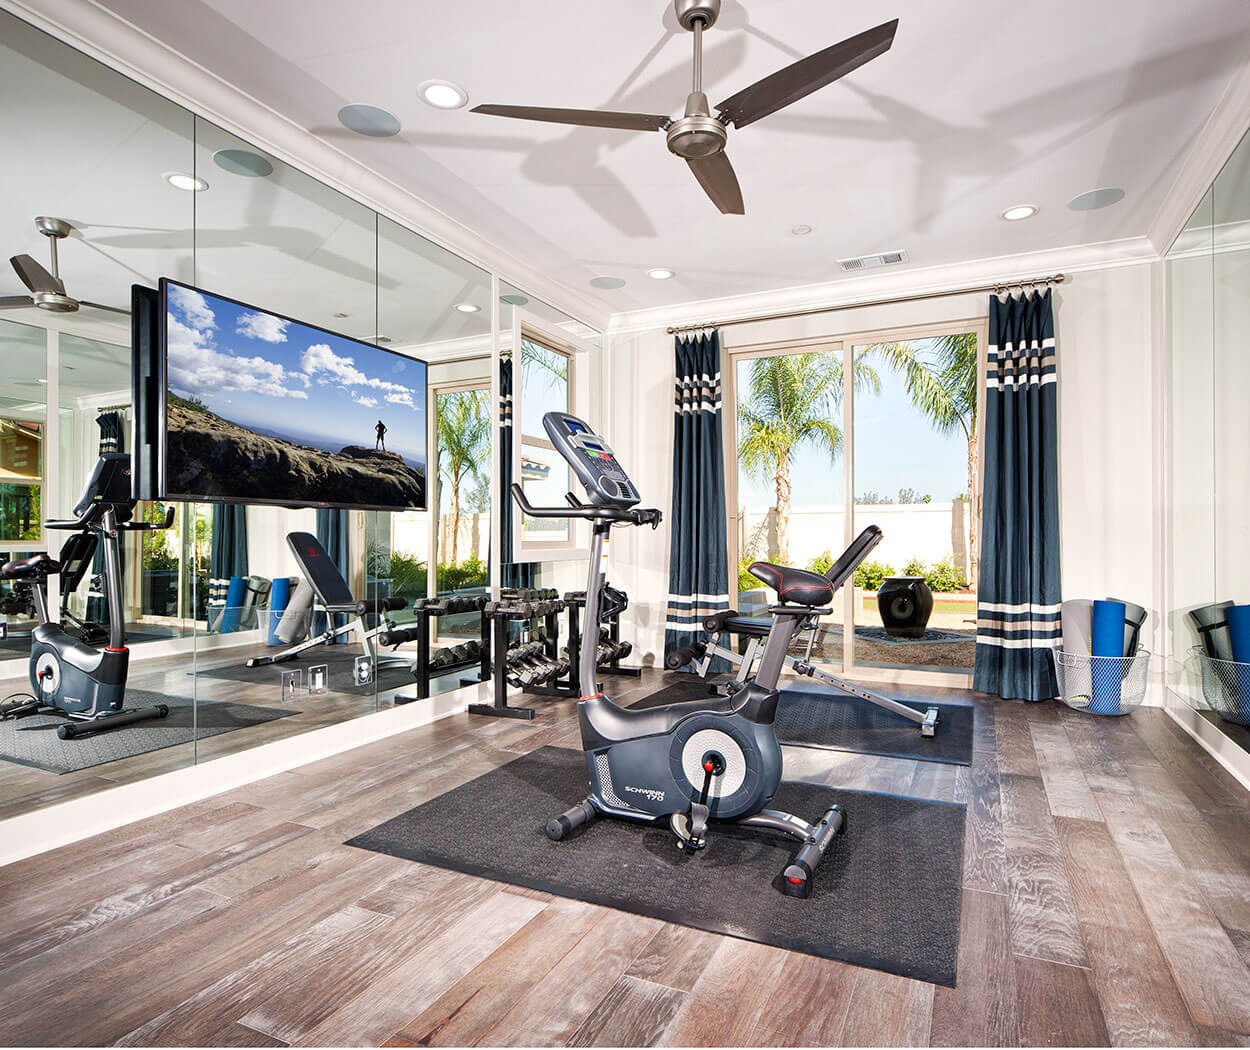 Here's everything you need to know about creating the ultimate home gym, including how to save money on fitness equipment.